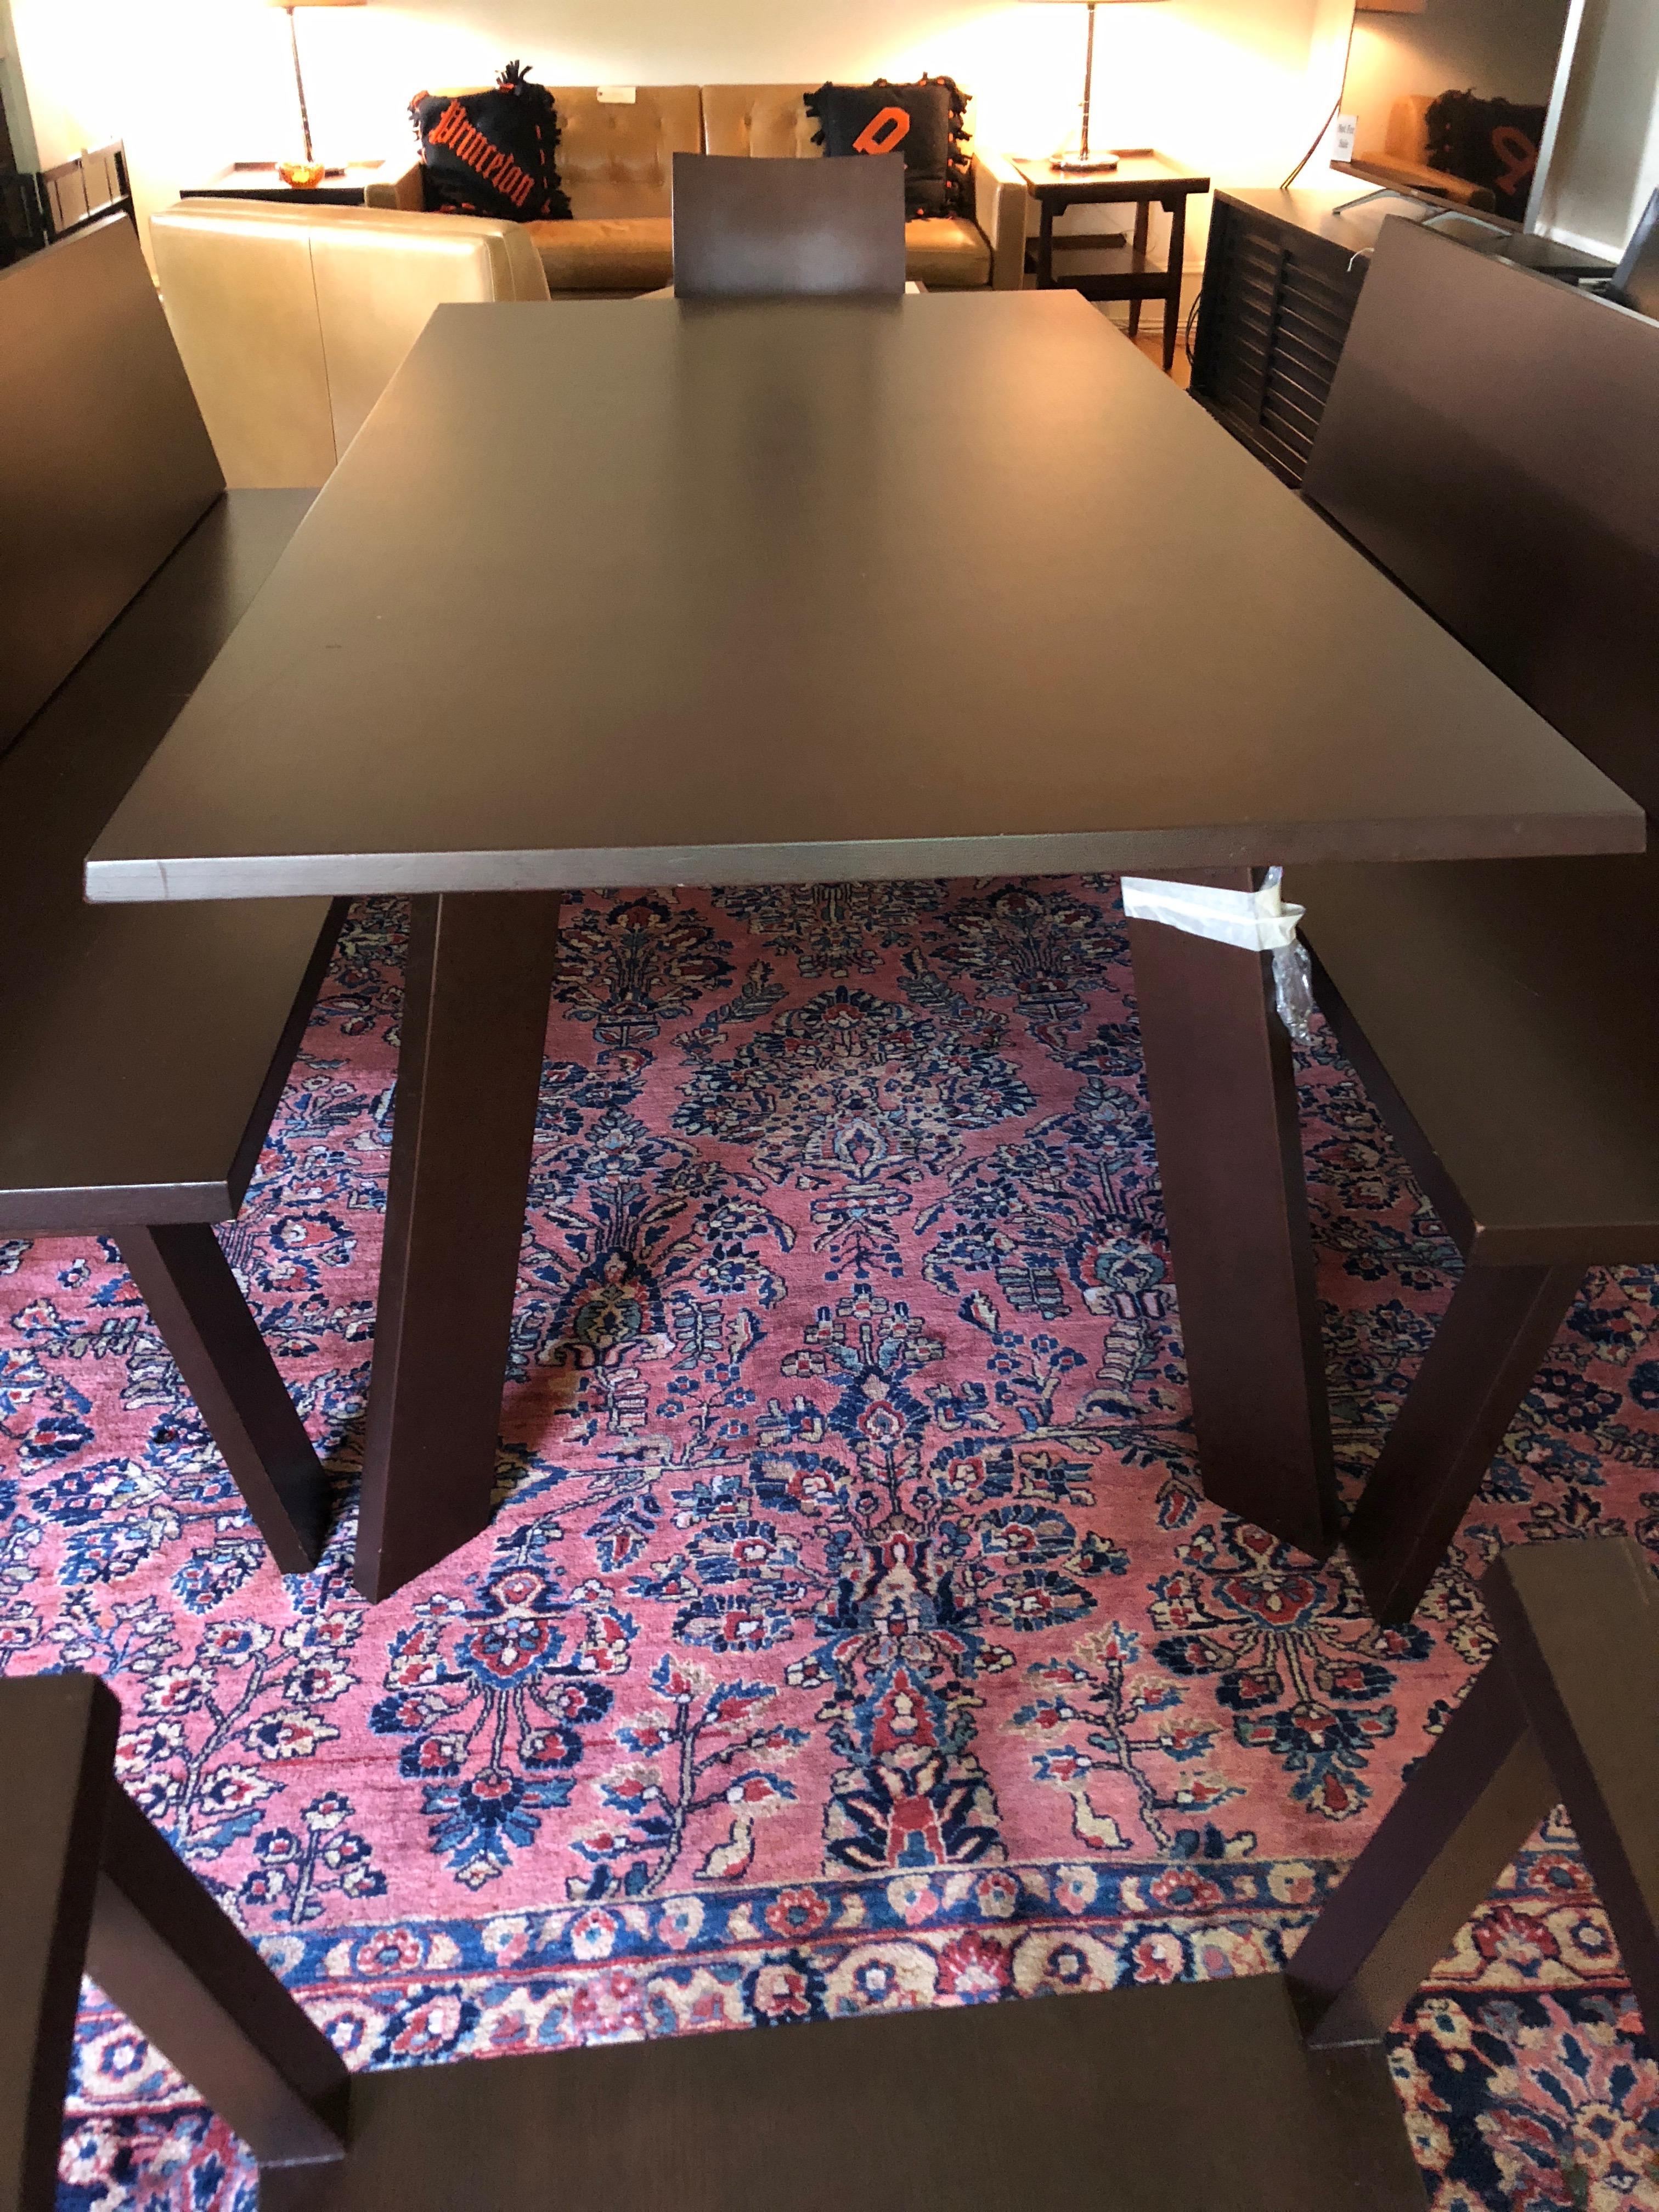 Very modern sleek custom dining table by the German Bulthaup Co., having two matching benches with backs that seat multiple diners along the length of the table. There are also two coordinating armchairs for either end.

Benches measure: 79 L,